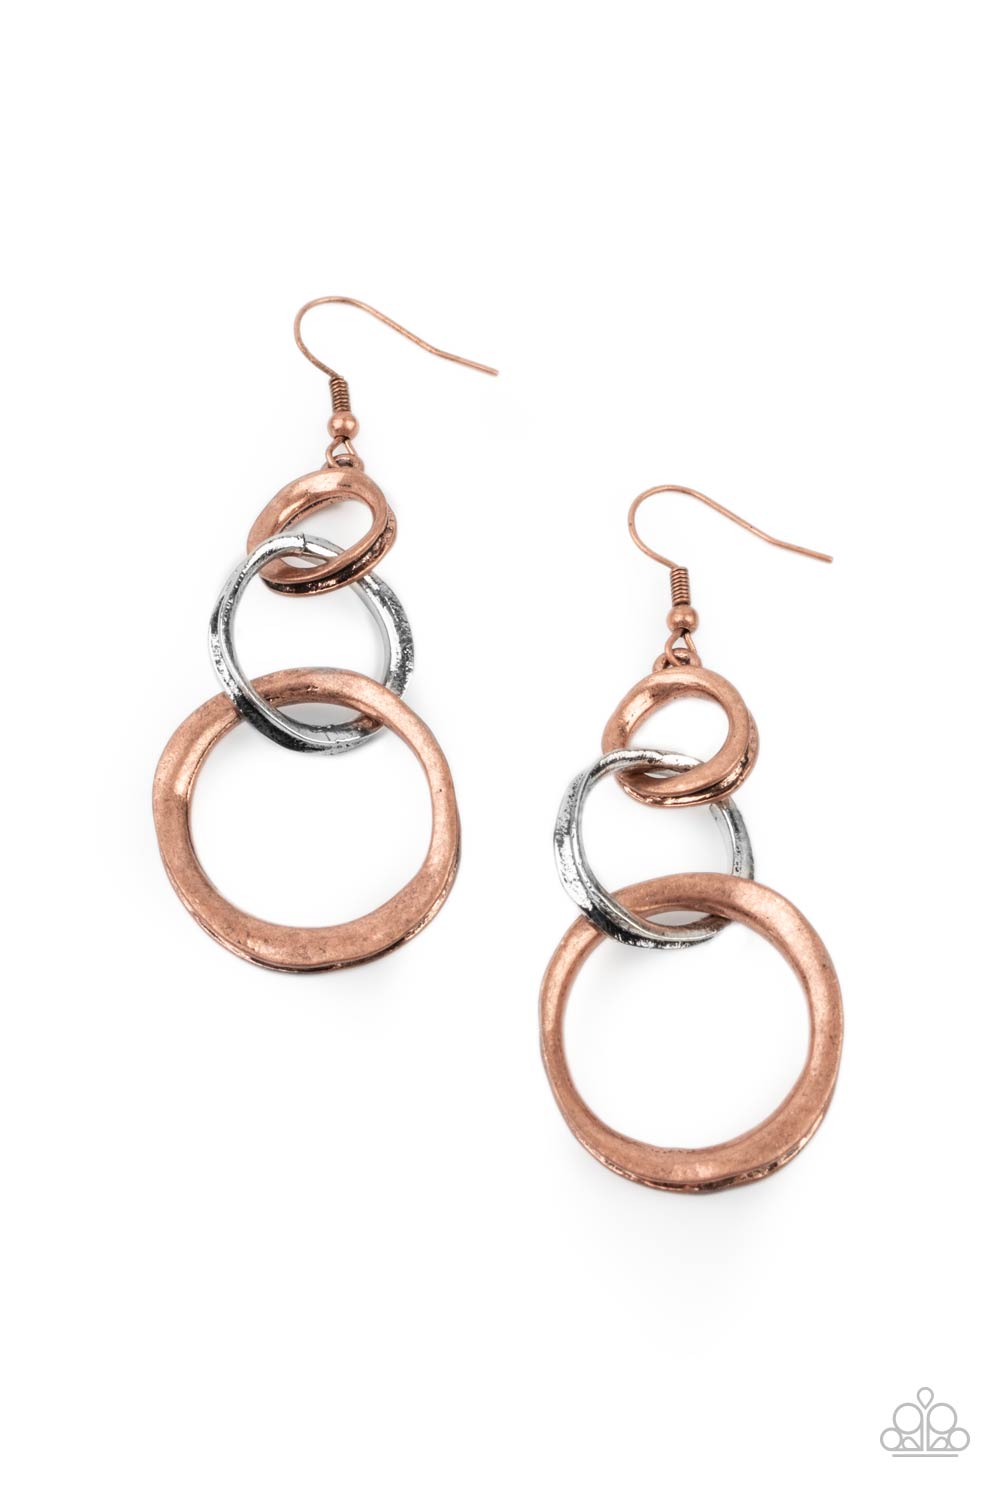 Paparazzi Harmoniously Handcrafted - Copper